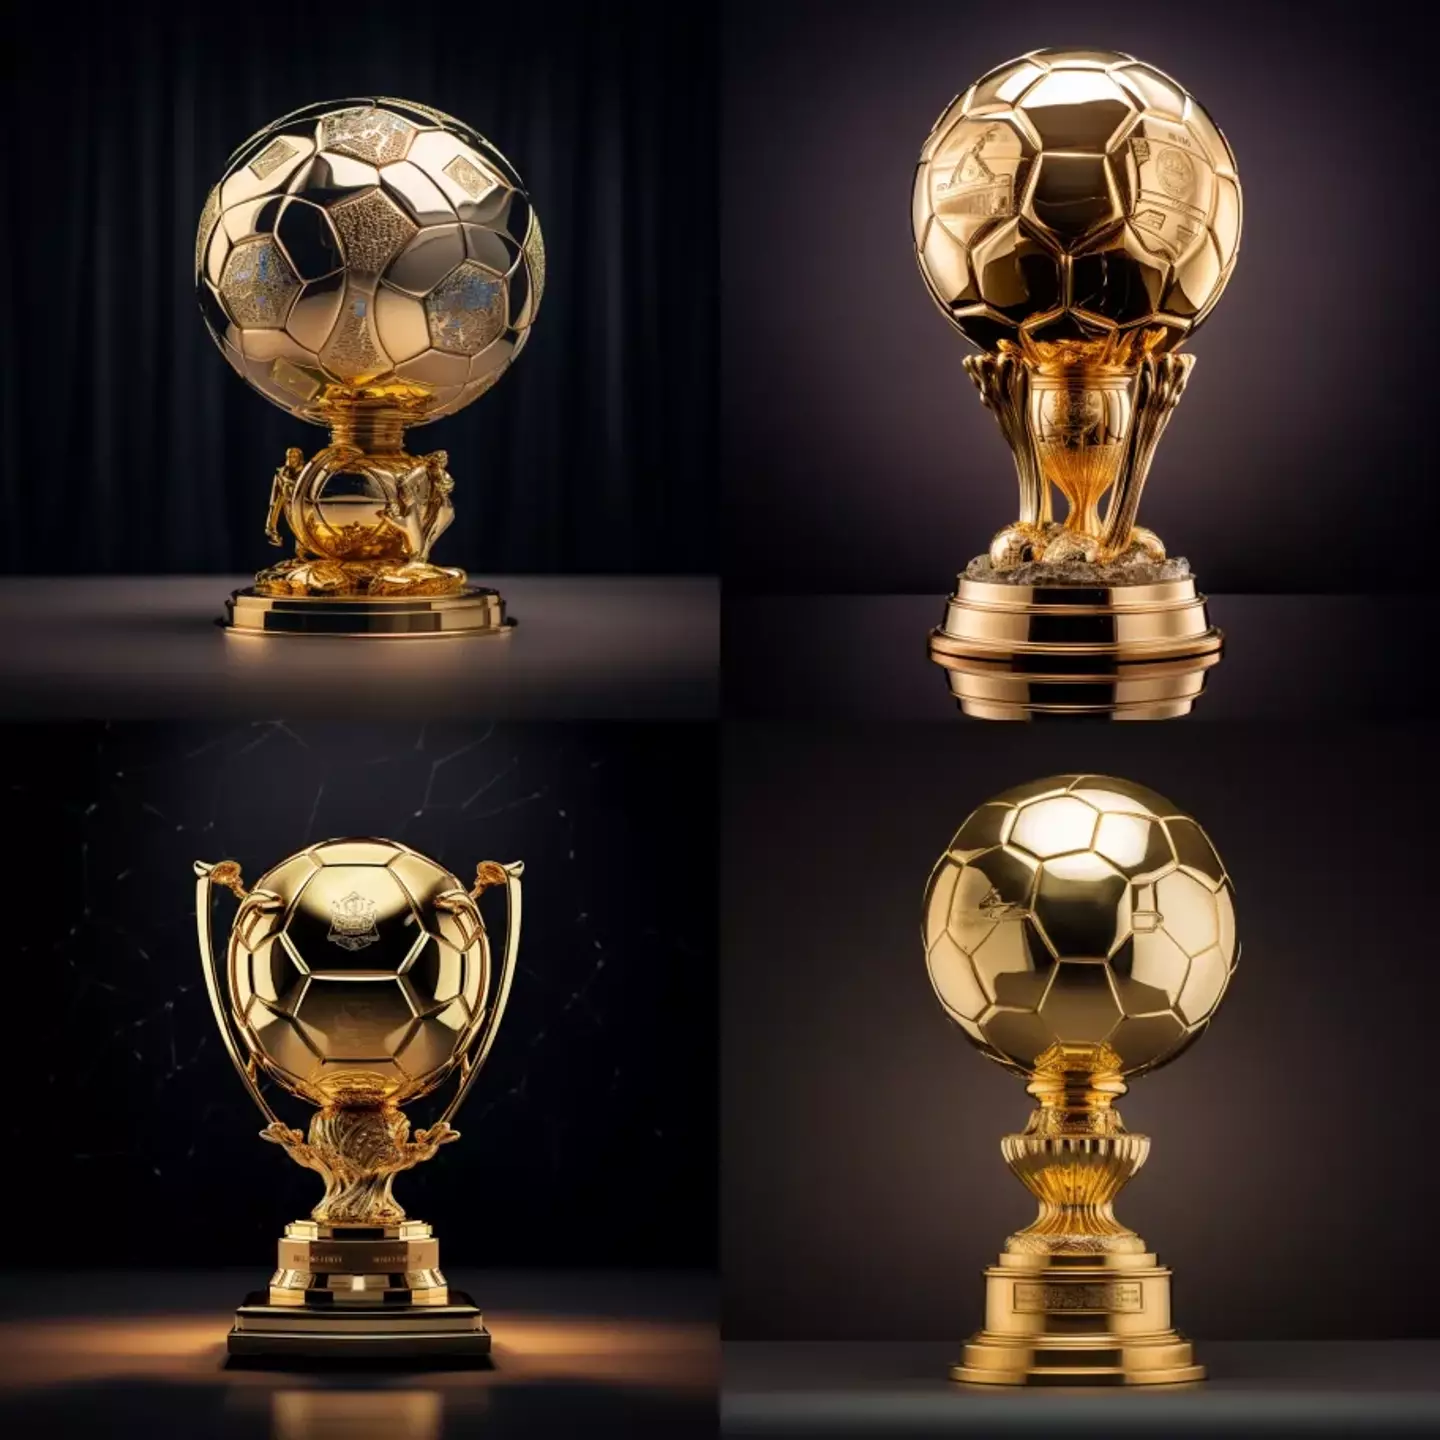 How the Ballon d'Or may look in 50 years.